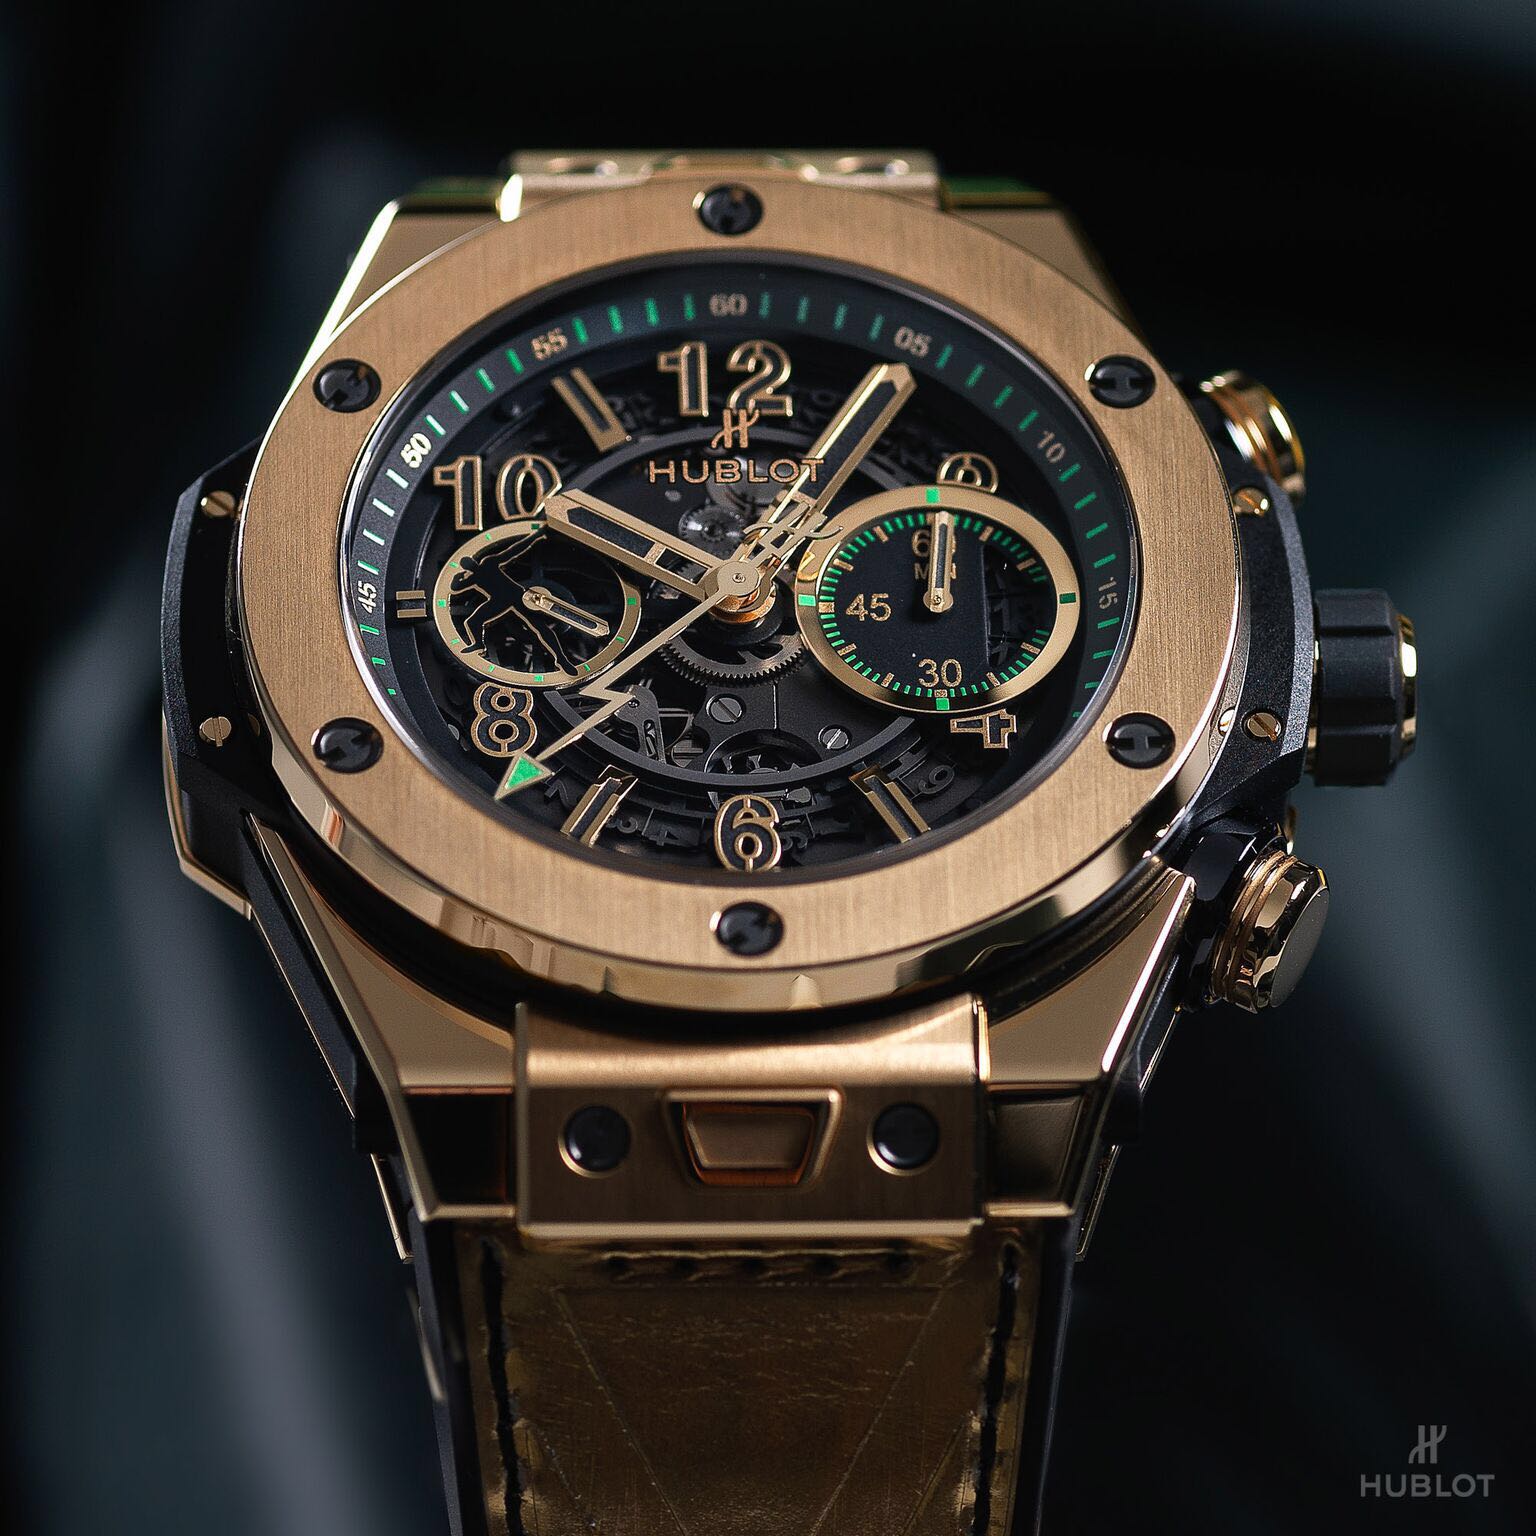 Hublot launches two new Usain Bolt signature watches